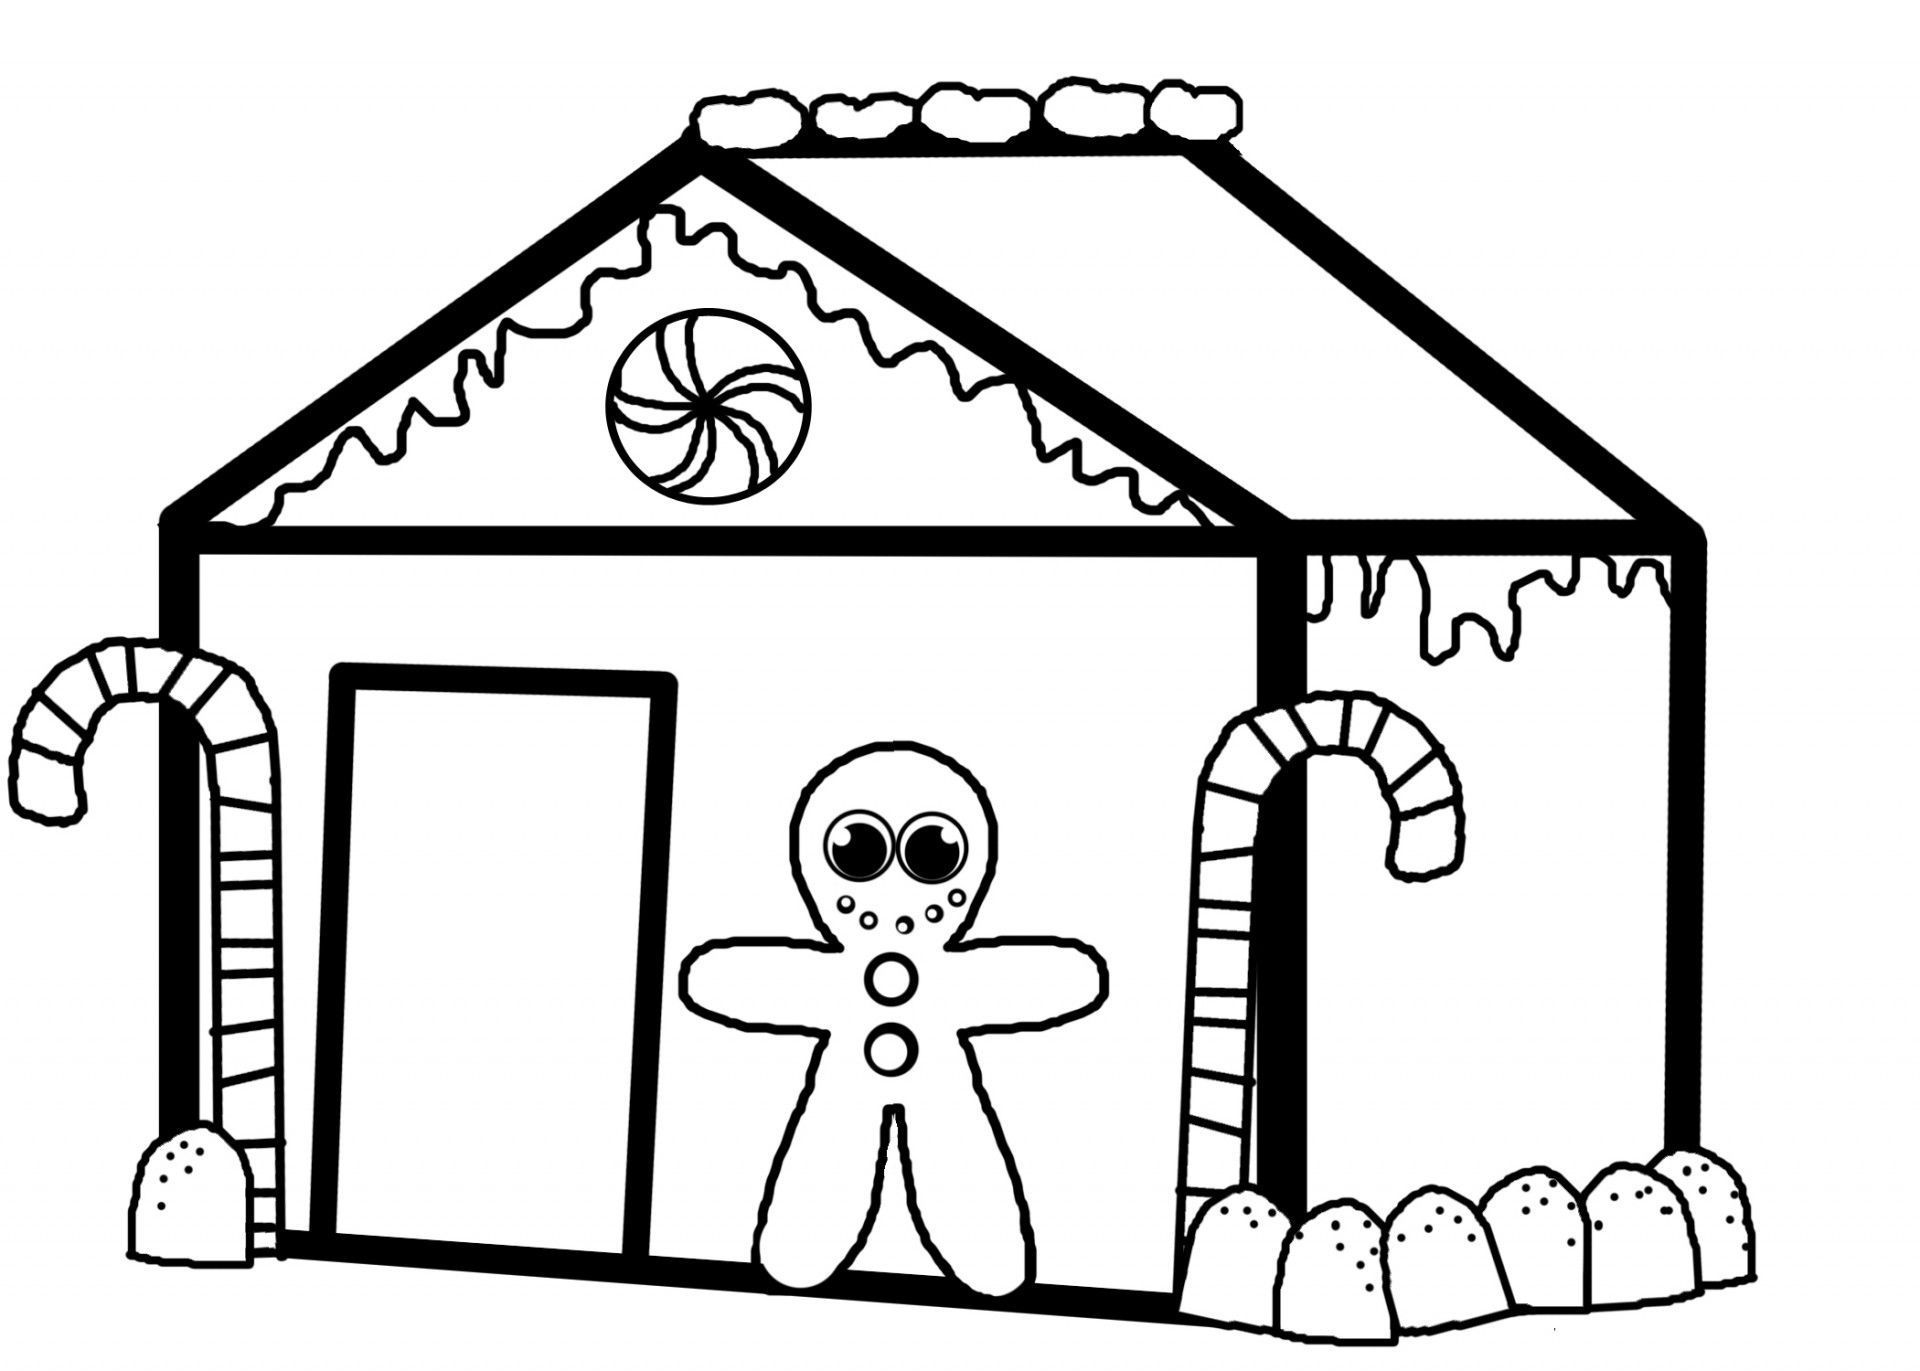 Big Christmas Houses Coloring Pages - Coloring Pages For All Ages